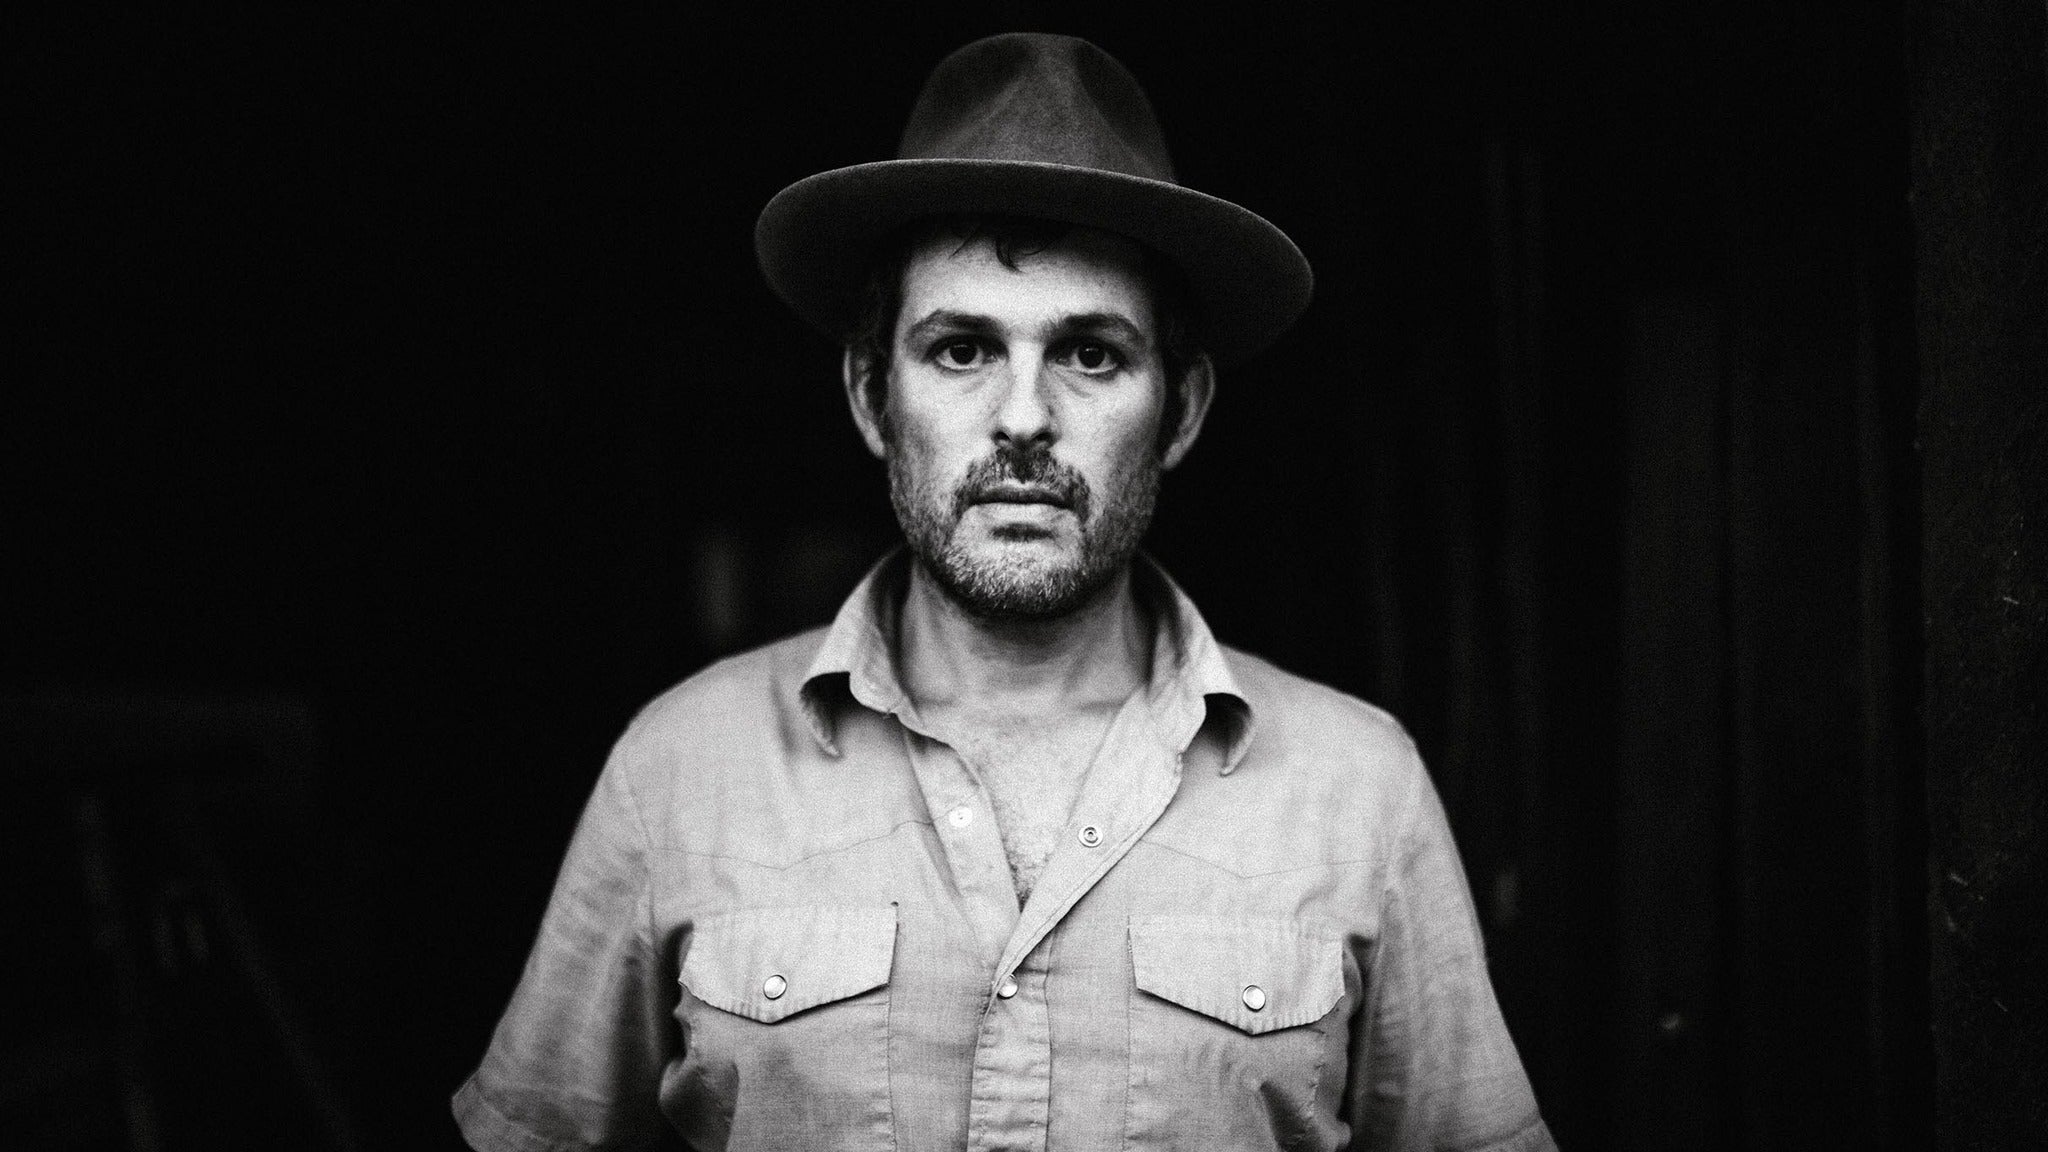 Gregory Alan Isakov with special guest Shovels & Rope presale password for real tickets in Vancouver